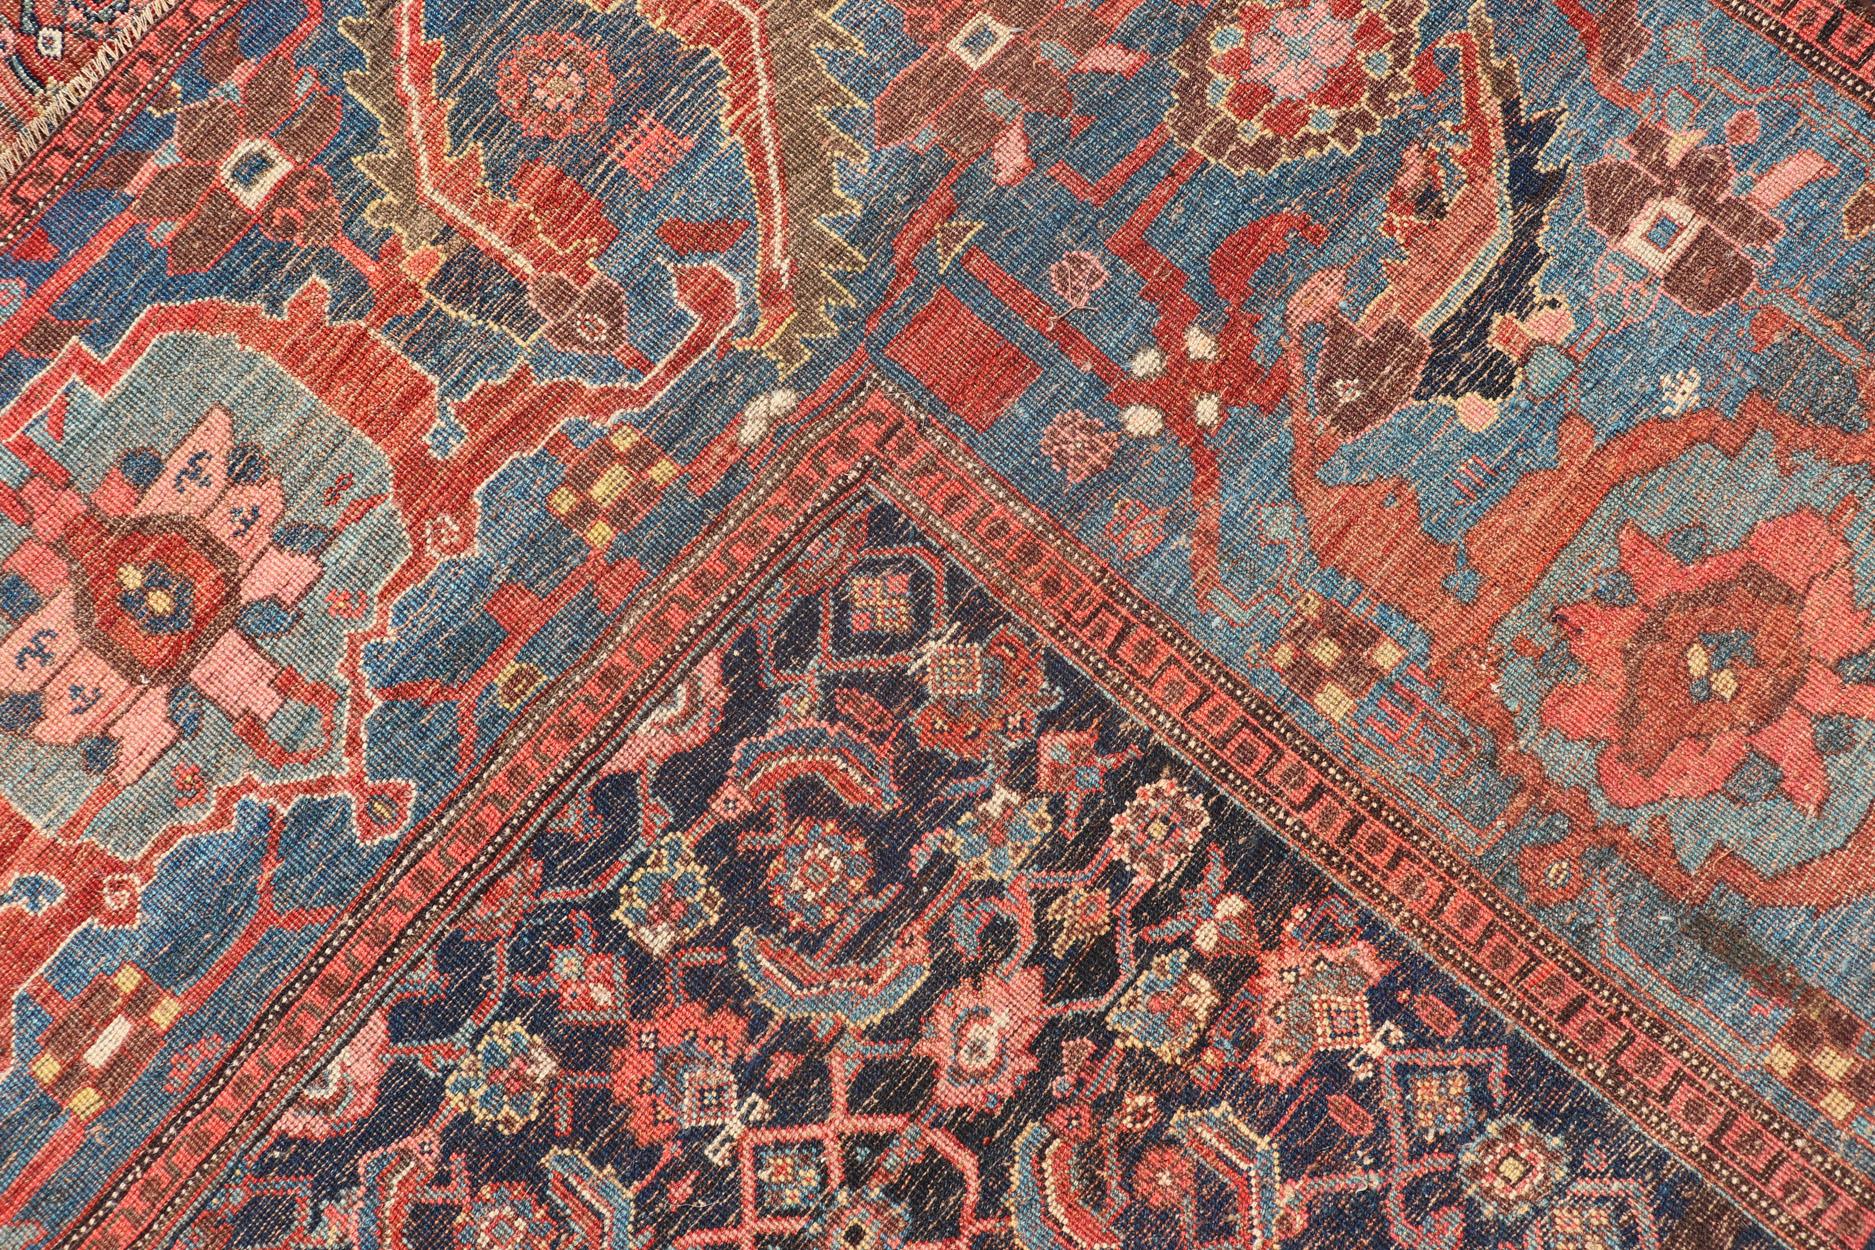 Very Large Antique Persian Bidjar Rug in Multi Shades of Blue, Tera-Cotta & Red For Sale 11